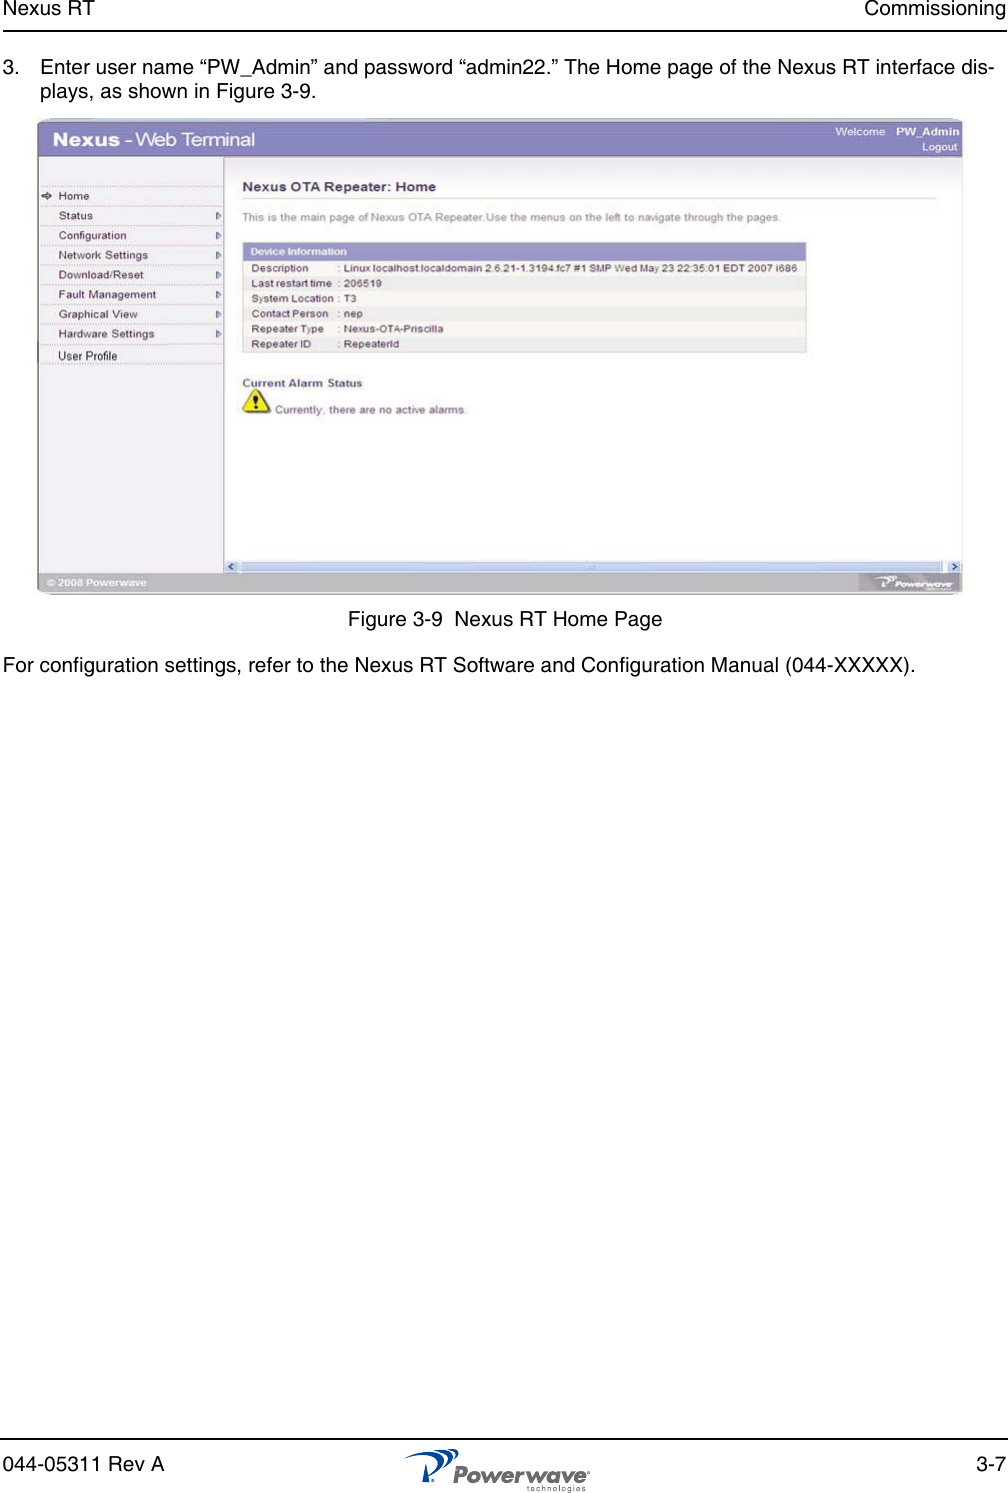 Nexus RT Commissioning044-05311 Rev A 3-73. Enter user name “PW_Admin” and password “admin22.” The Home page of the Nexus RT interface dis-plays, as shown in Figure 3-9.Figure 3-9  Nexus RT Home PageFor configuration settings, refer to the Nexus RT Software and Configuration Manual (044-XXXXX).